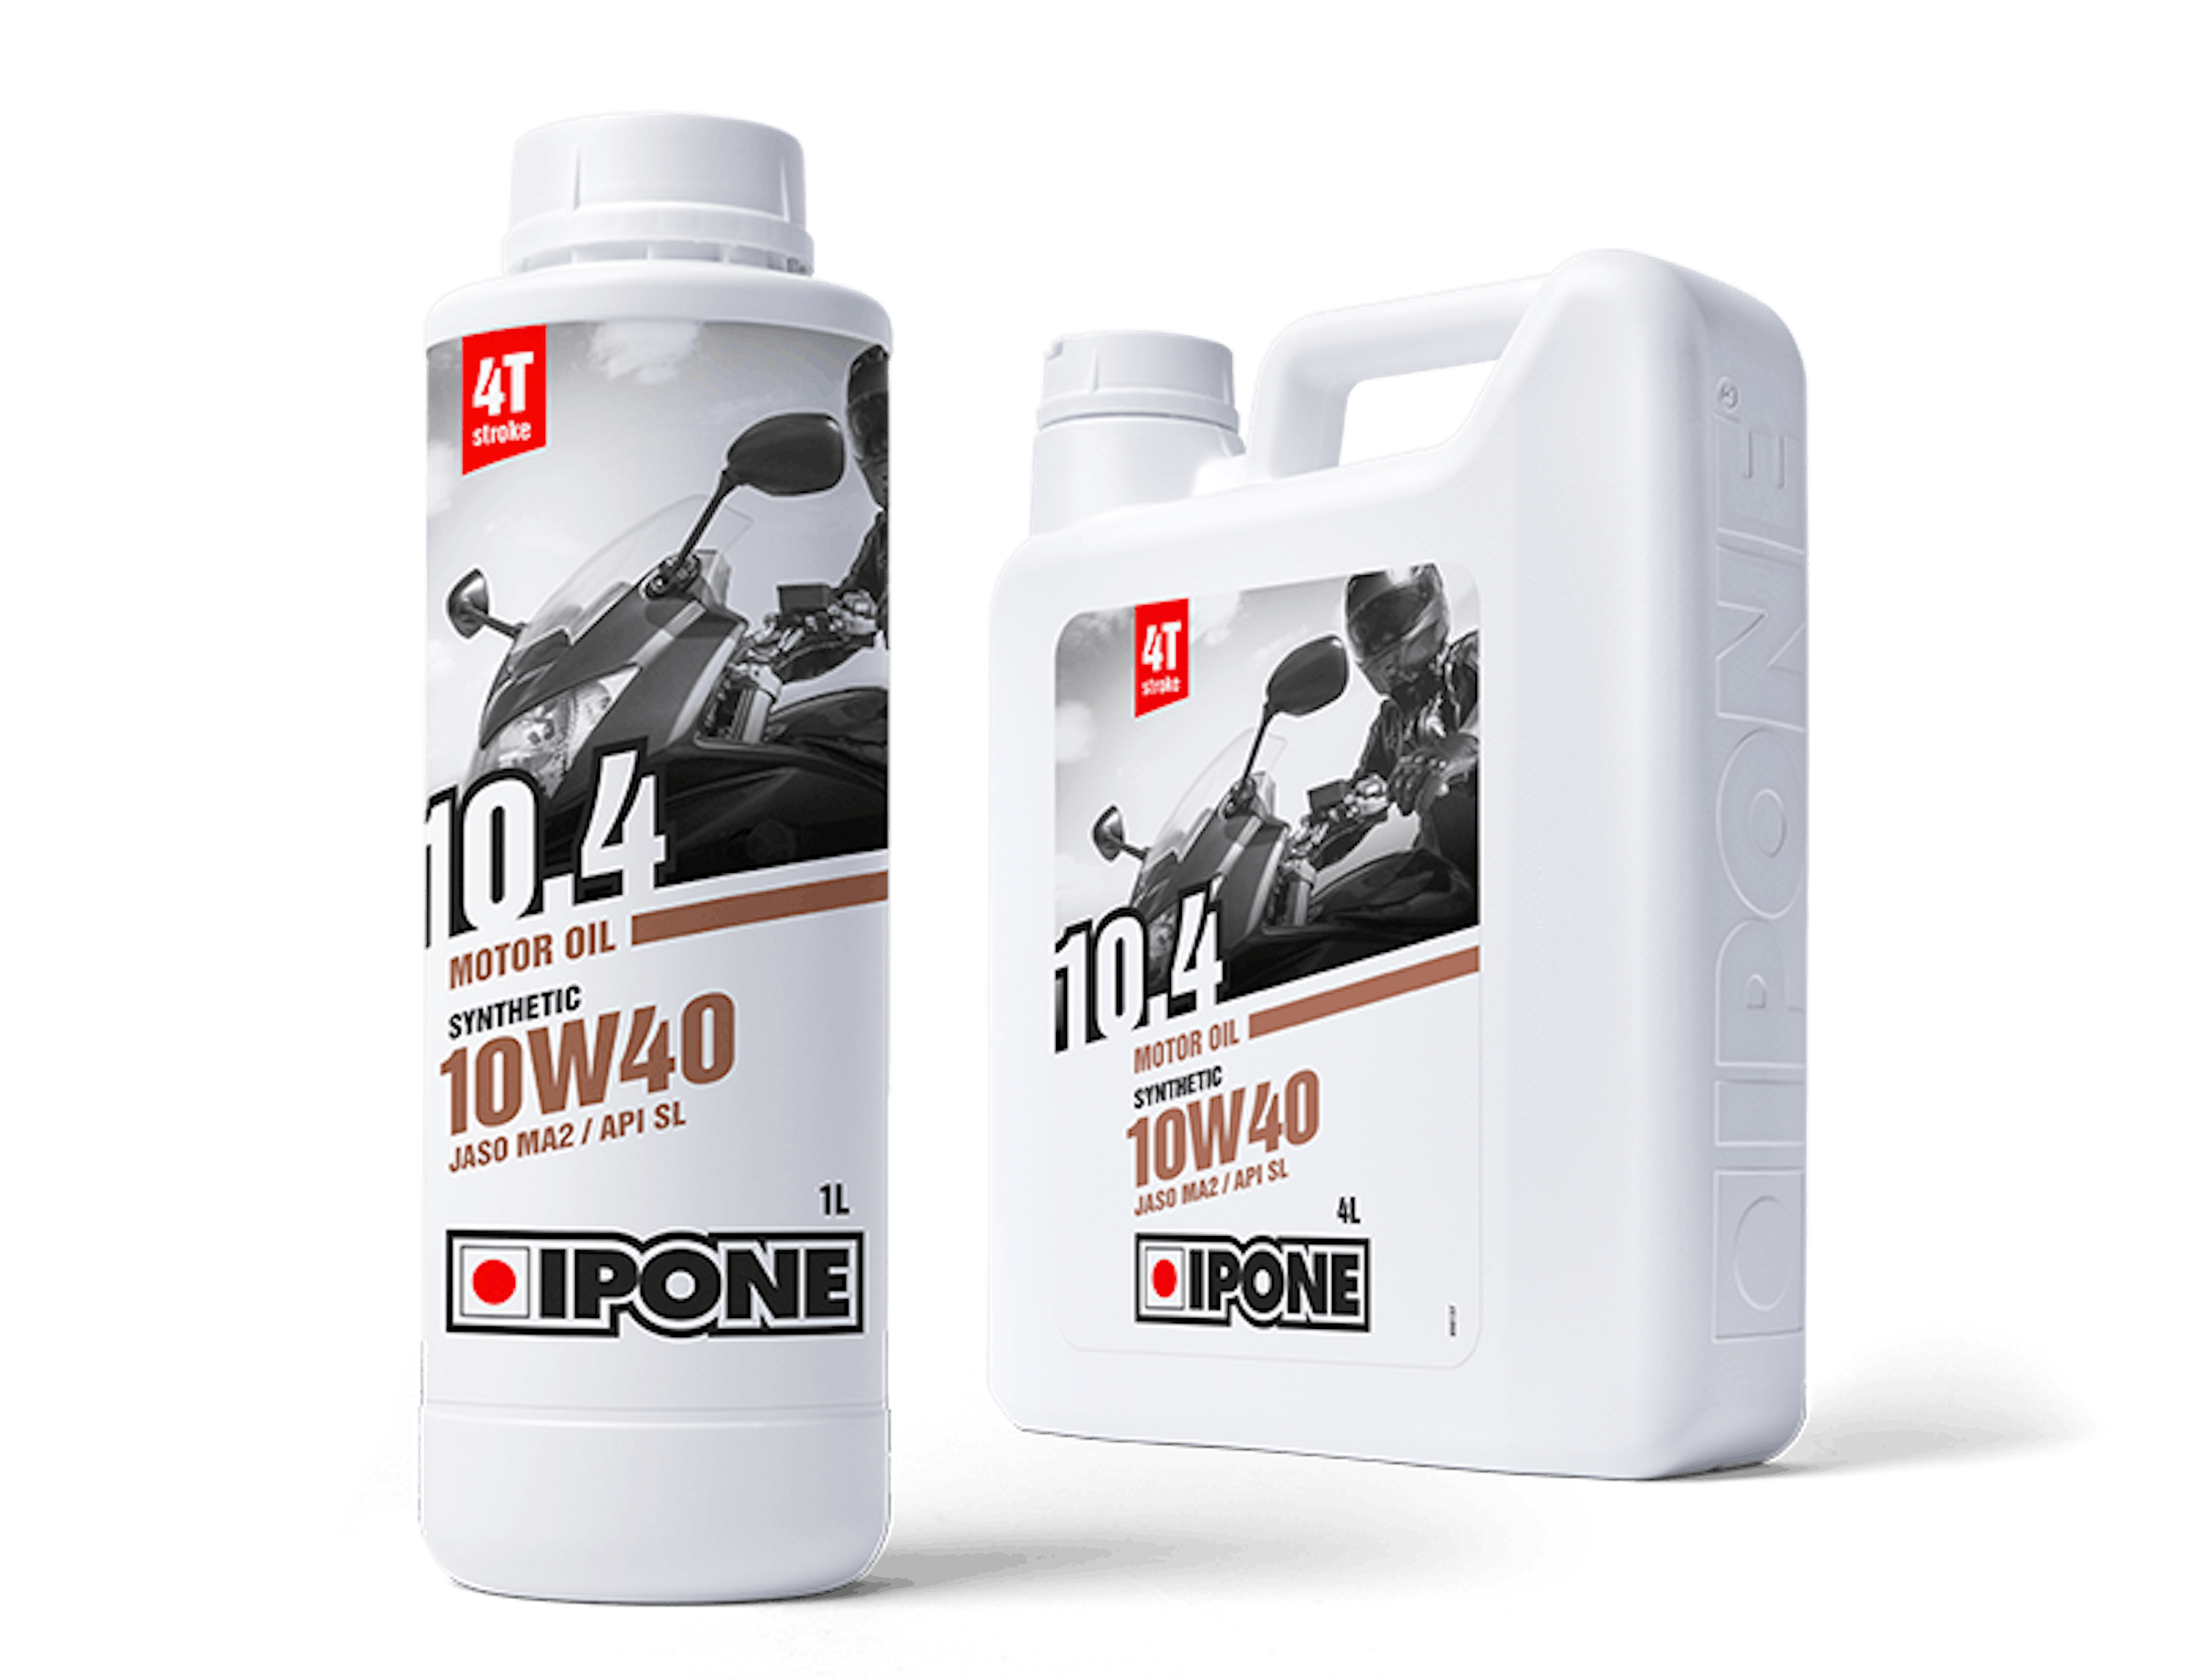 Ipone 10.4 Synthetic Motor Oil